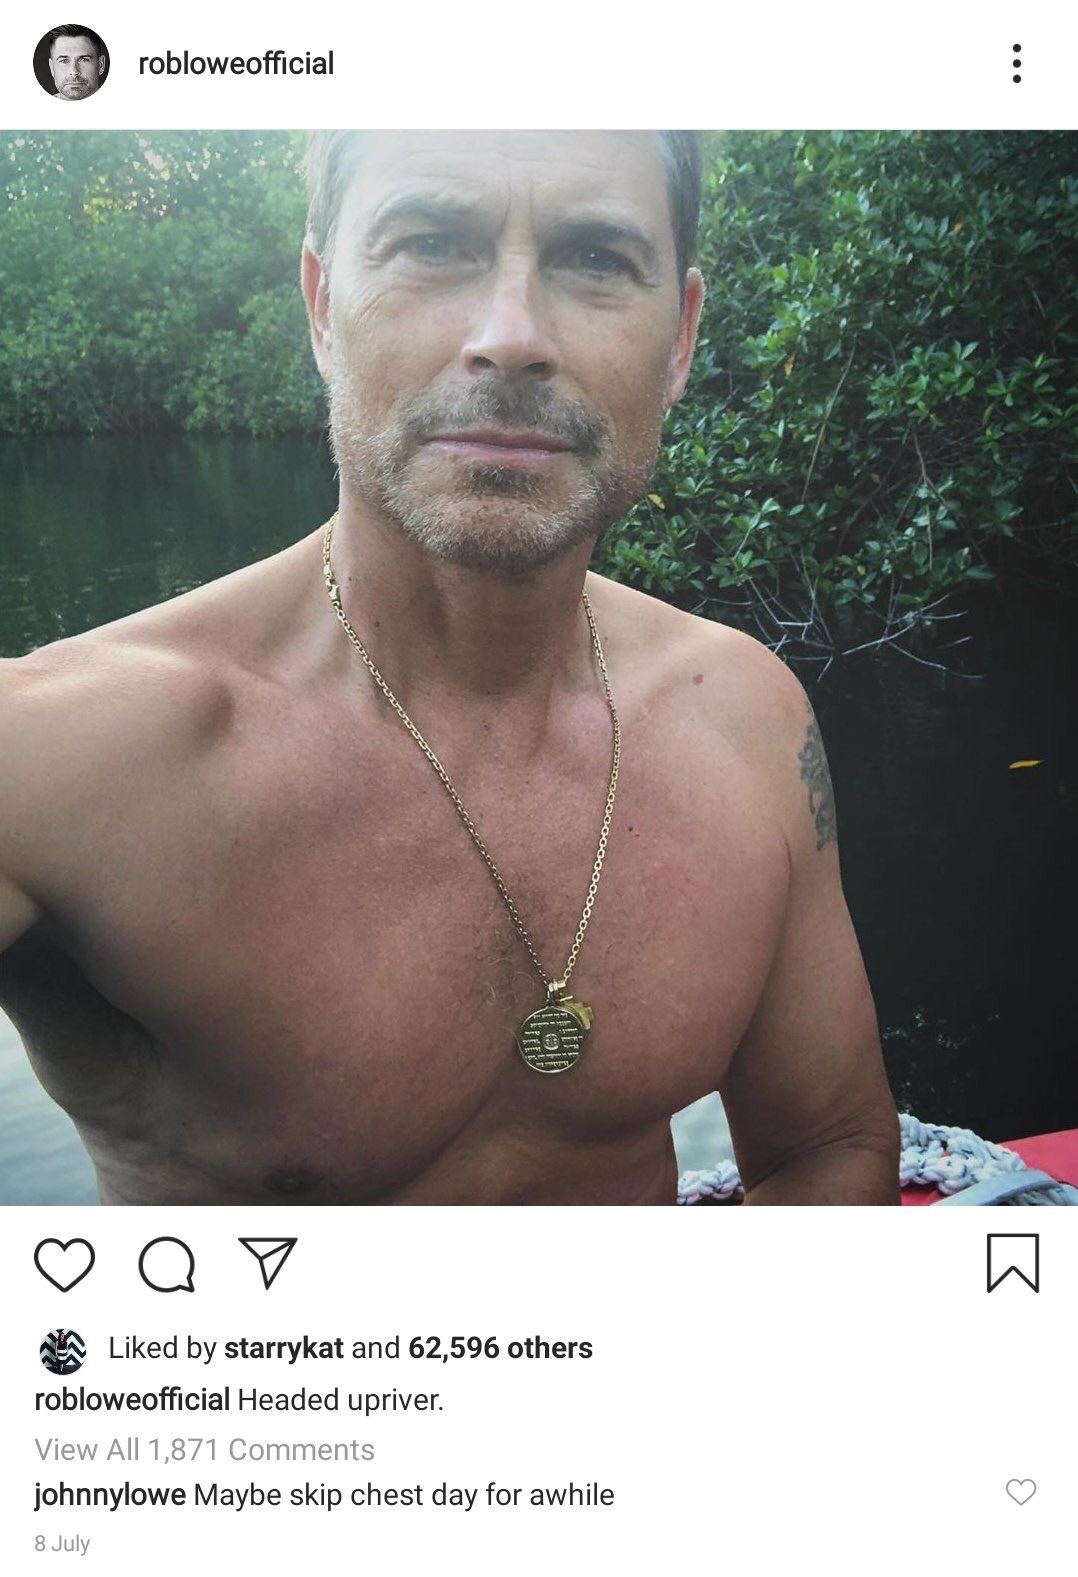 barechestedness - robloweofficial starrykat and 62,596 others robloweofficial Headed upriver. View All 1,871 johnnylowe Maybe skip chest day for awhile 8 July